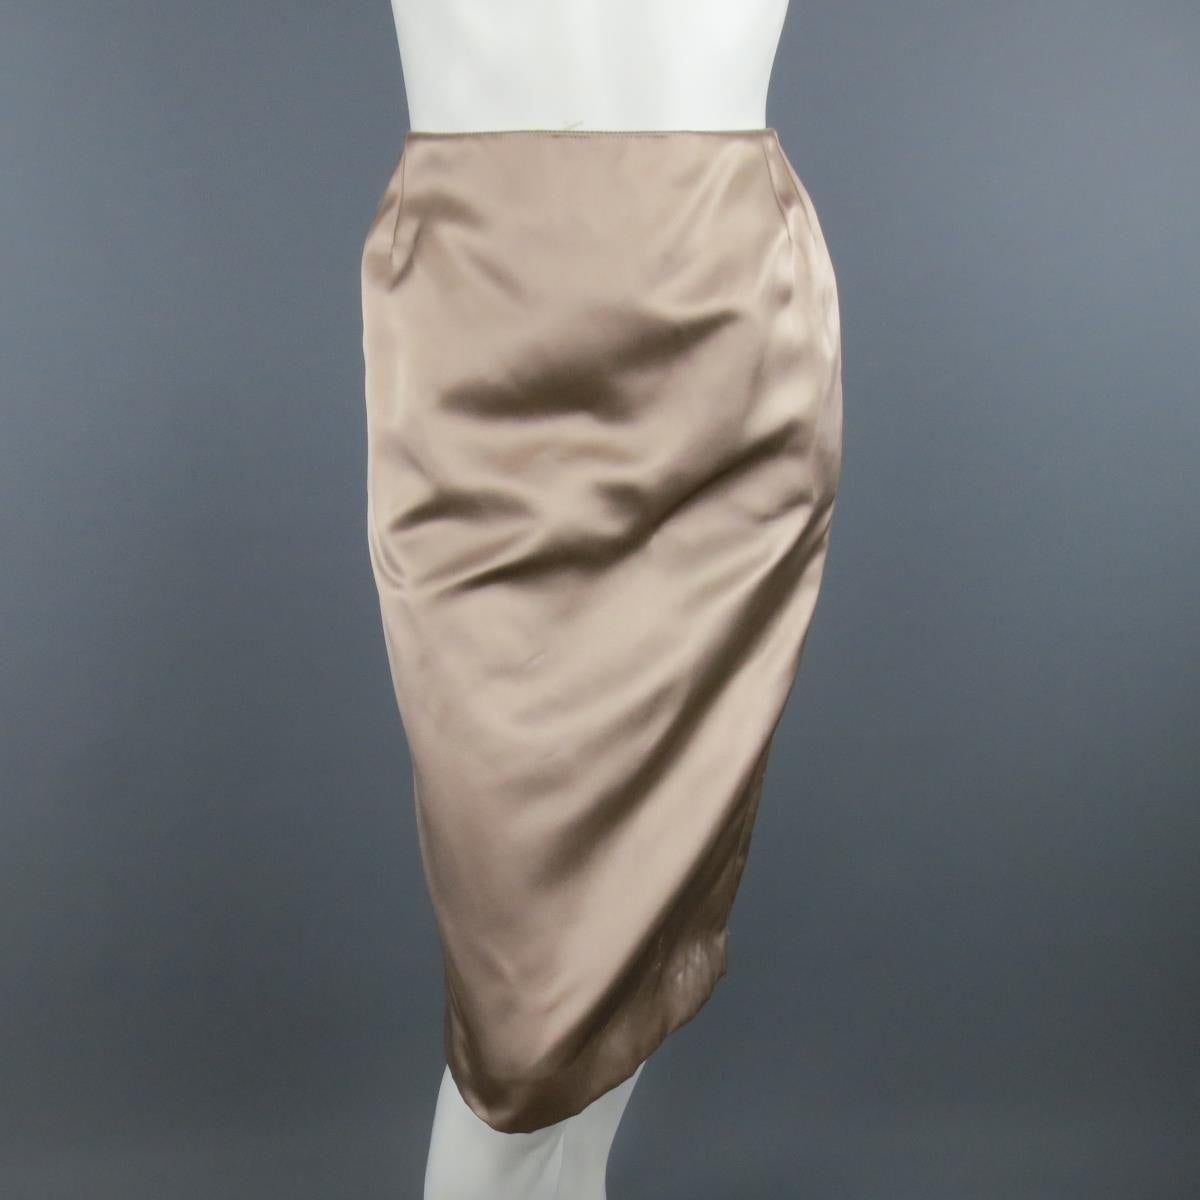 Archival YVES SANT LAURENT Rive Gauche by Tom Ford suit comes in nude beige silk satin includes a three button jacket with pointed lapel, flap pockets, satin buttons, and zig zag stitch hem details throughout with a matching pencil skirt.
 Made in